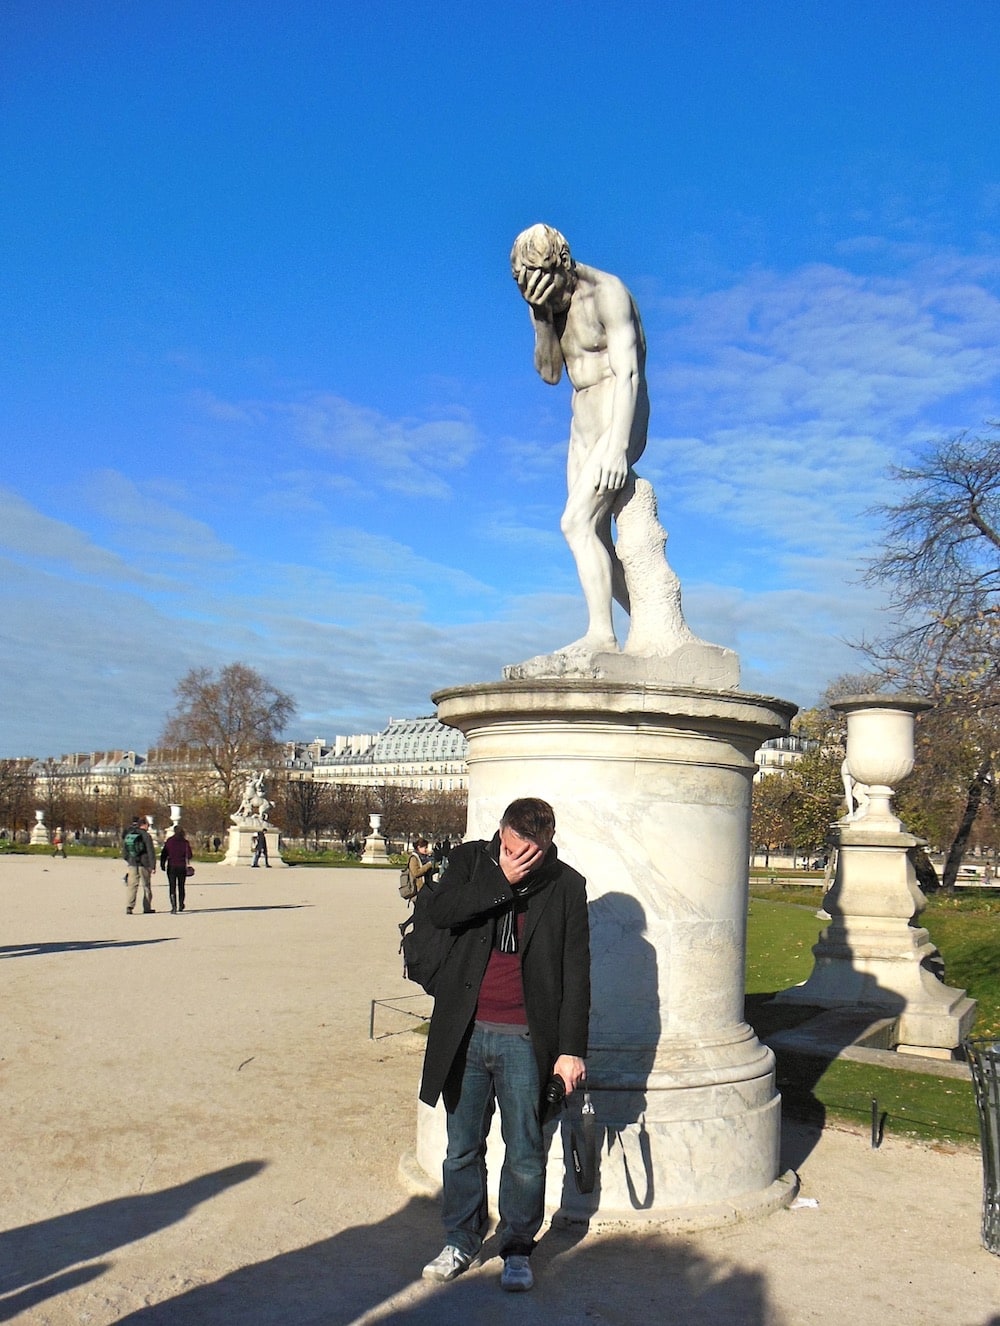 Phil with a statue making a similar pose of his head in his hands